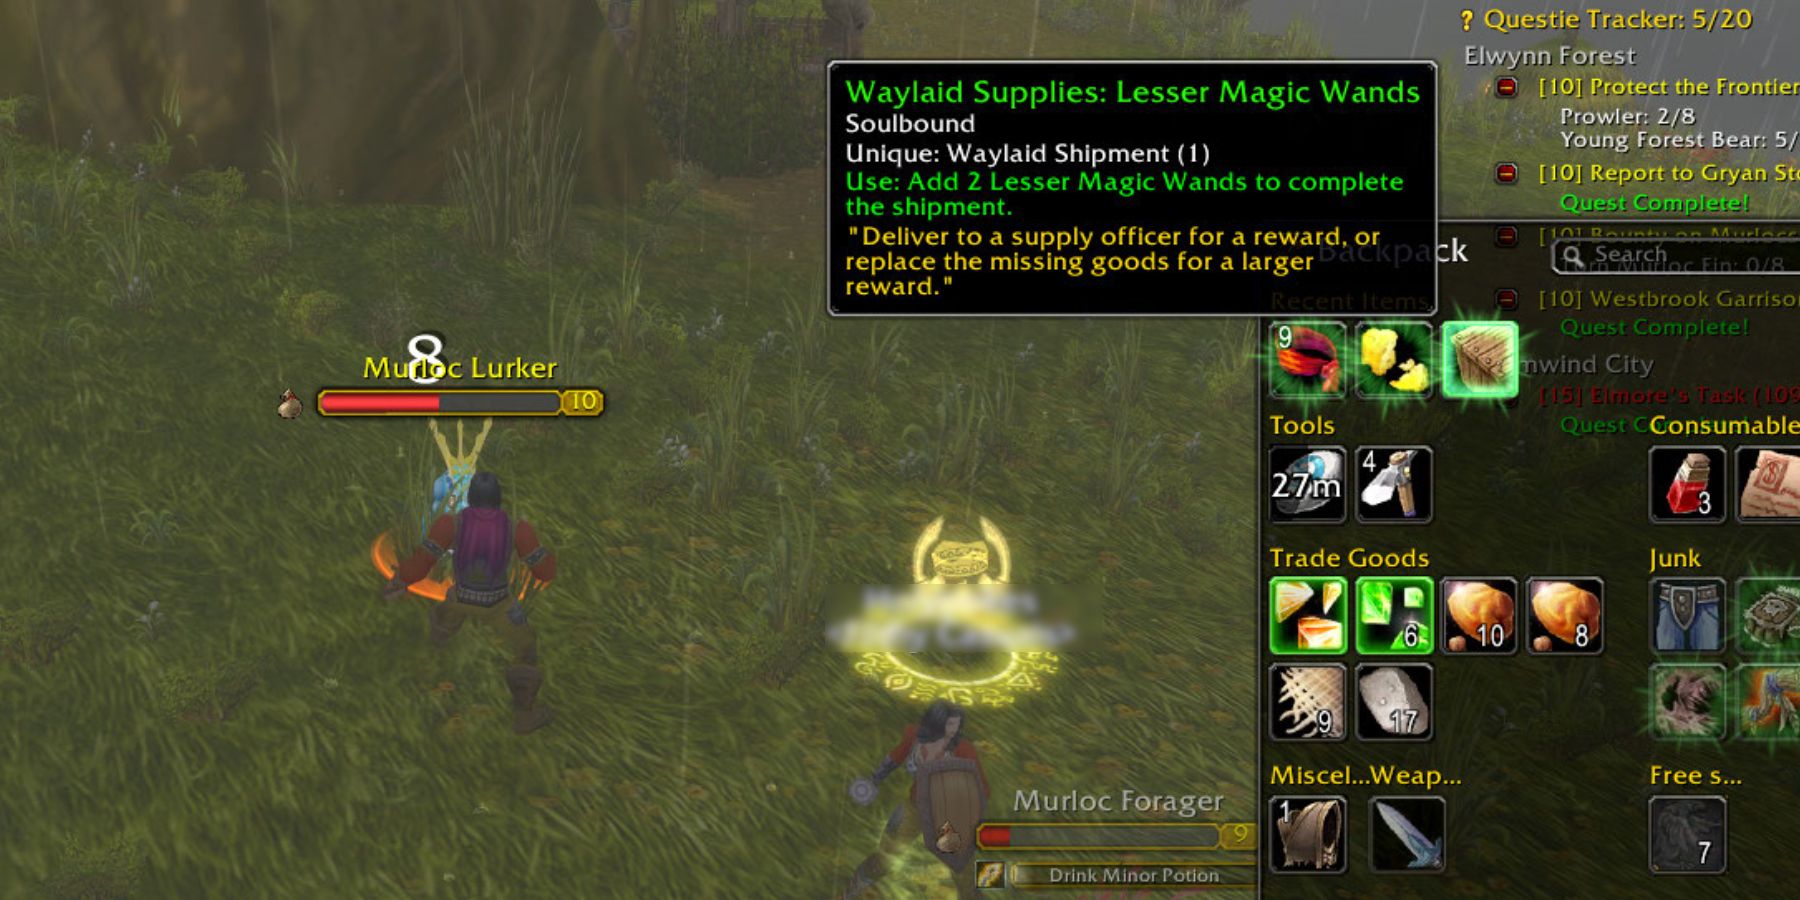 World of Warcraft Season of Discovery WoW SoD Paladin Beacon of Light Rune Guide Waylaid Supplies Rep-1